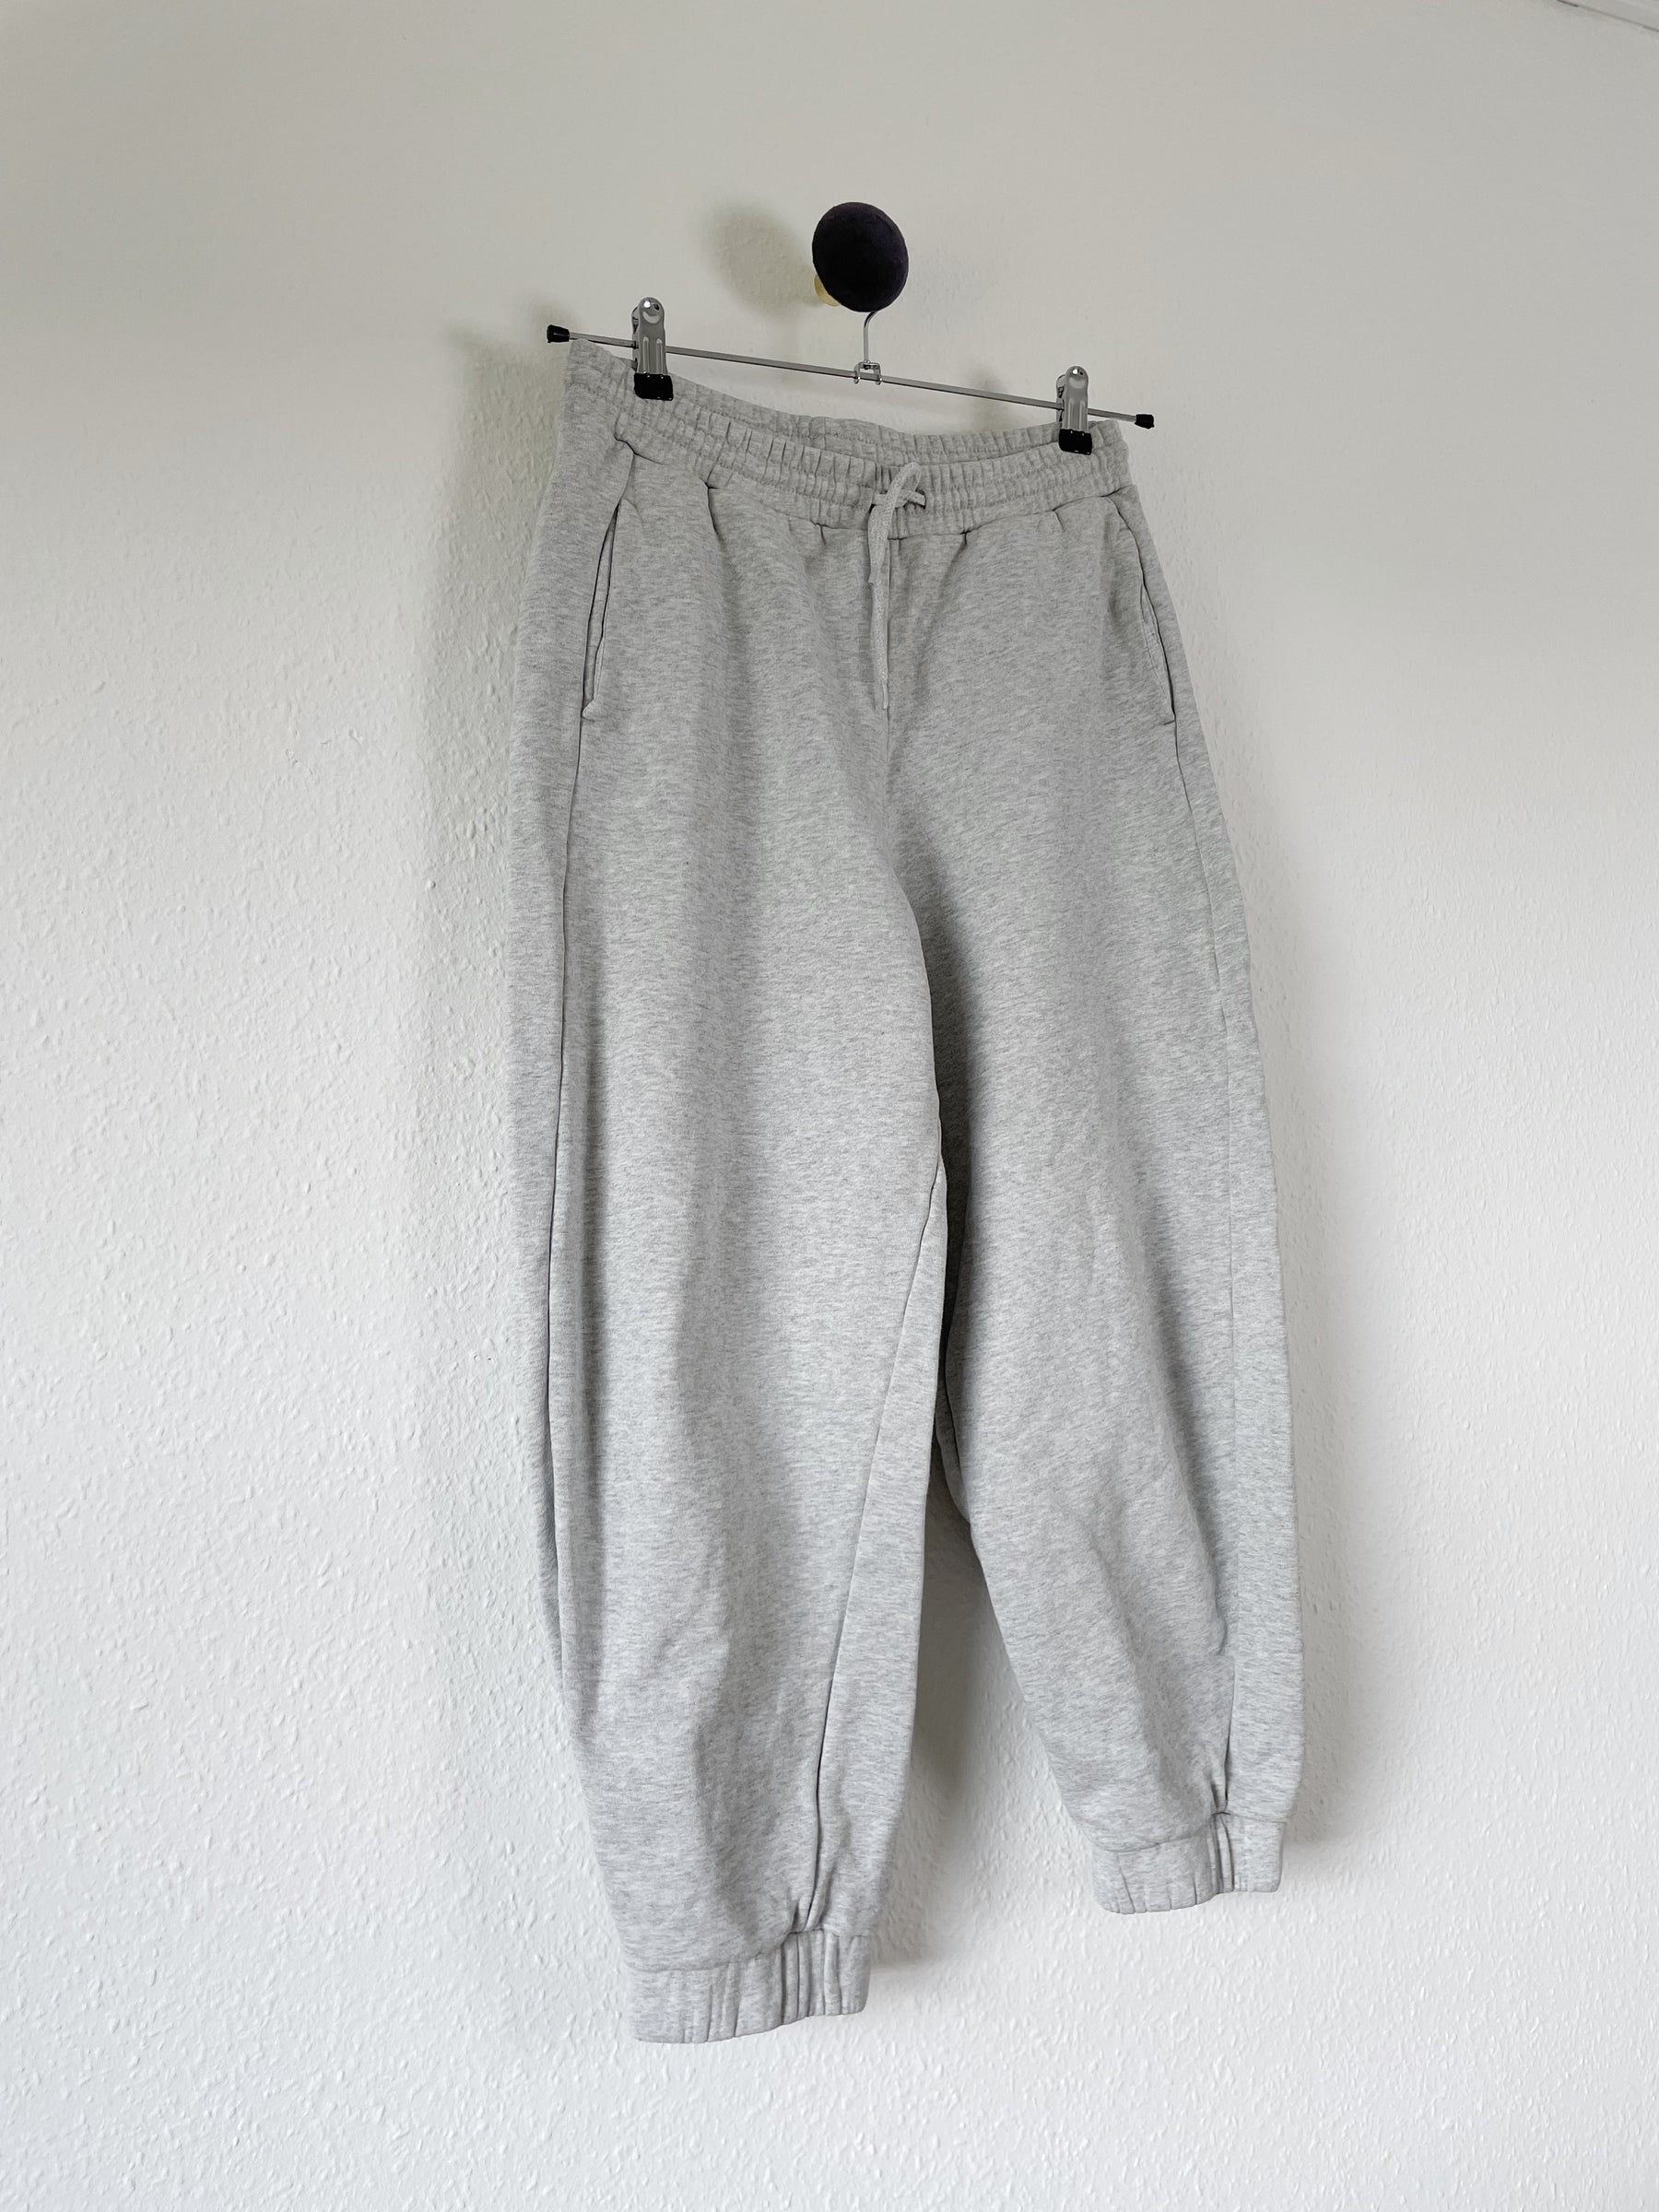 & Other stories sweatpants